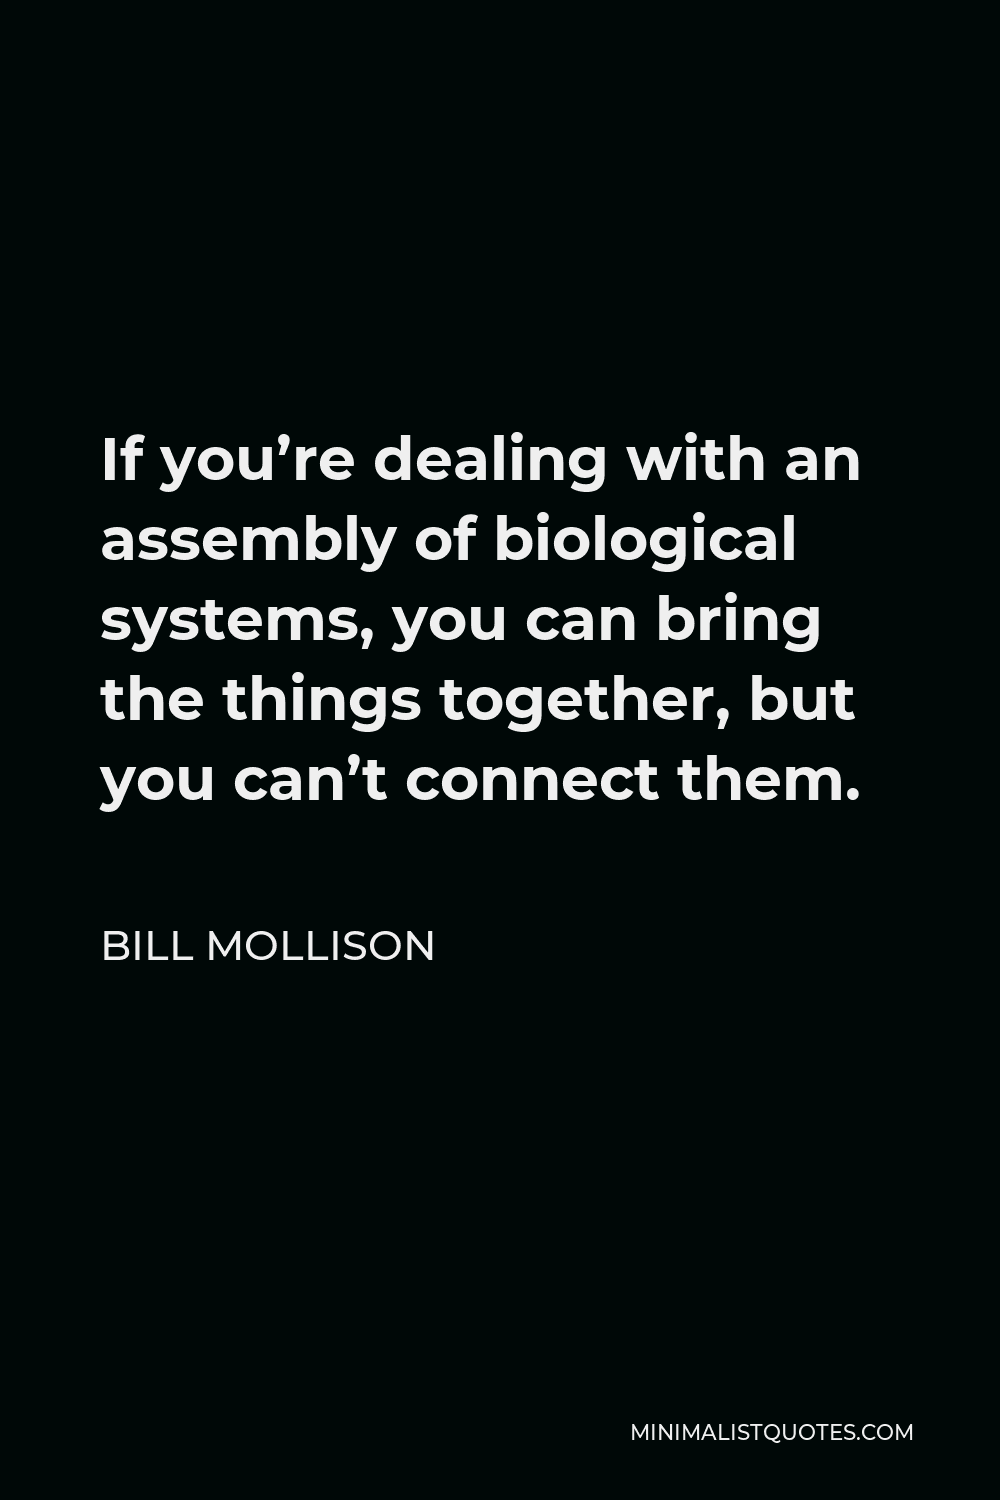 Bill Mollison Quote - If you’re dealing with an assembly of biological systems, you can bring the things together, but you can’t connect them.